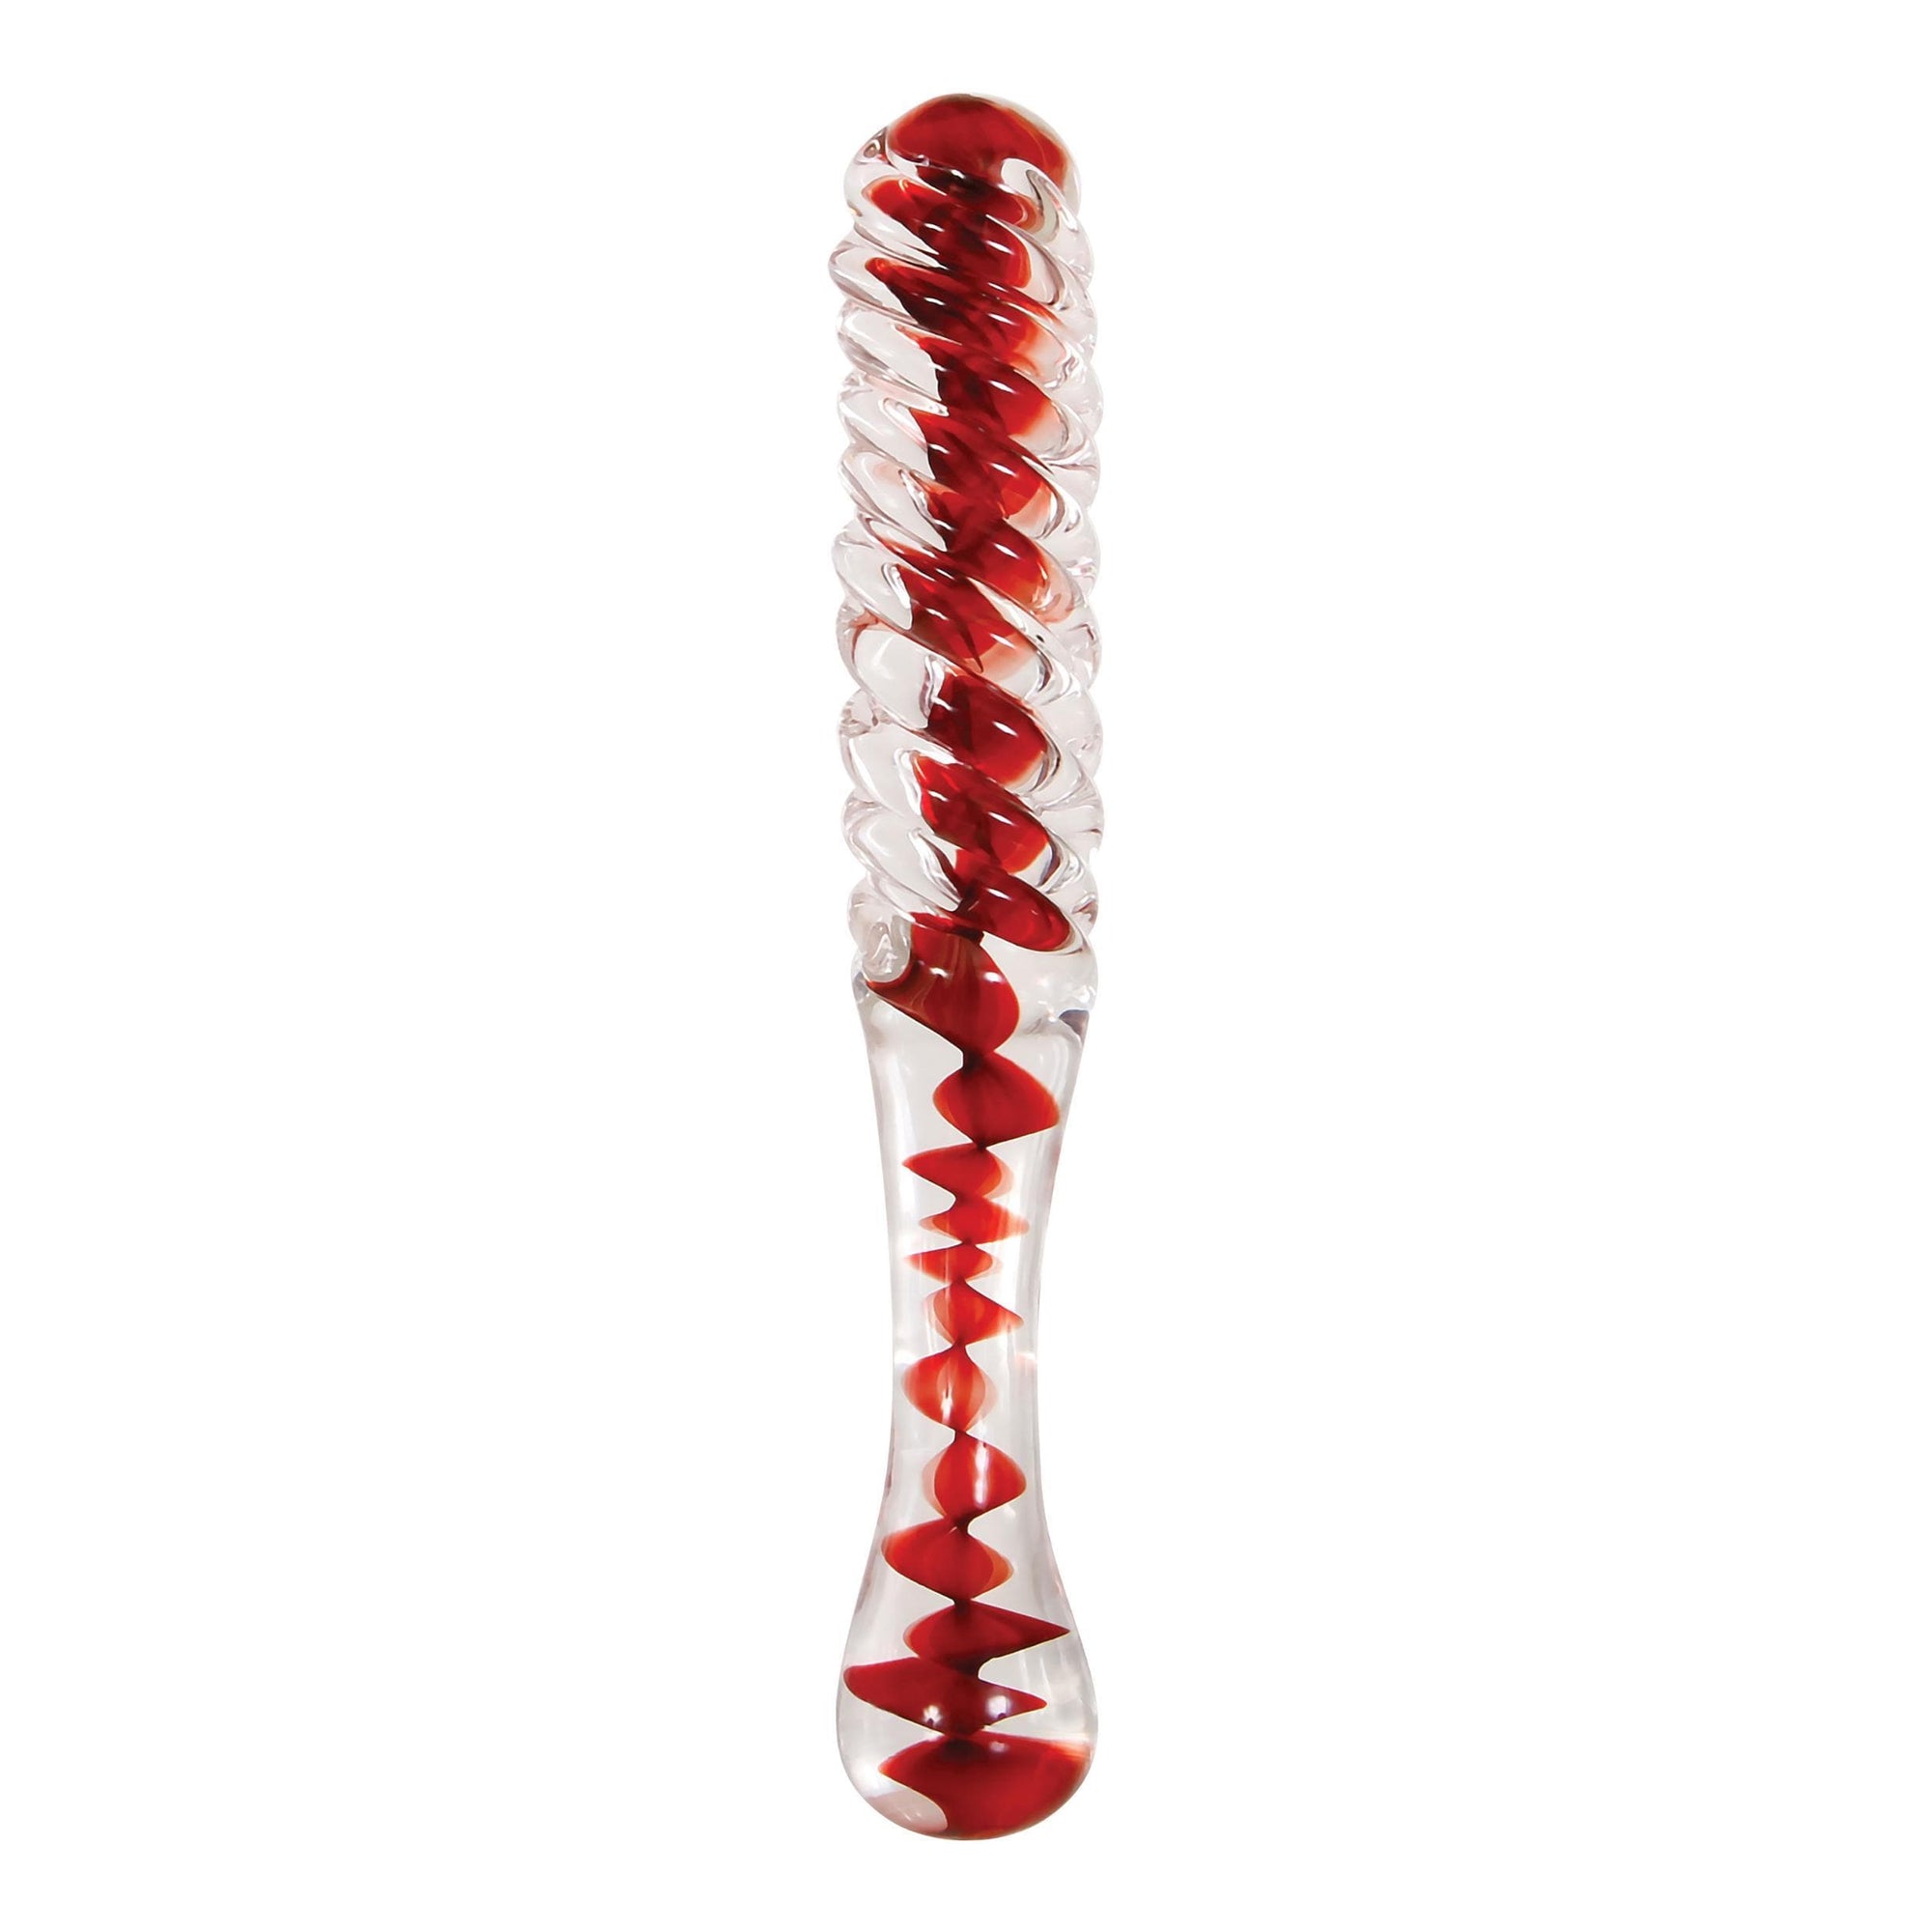 Glass Dildo    Adam and Eve Products